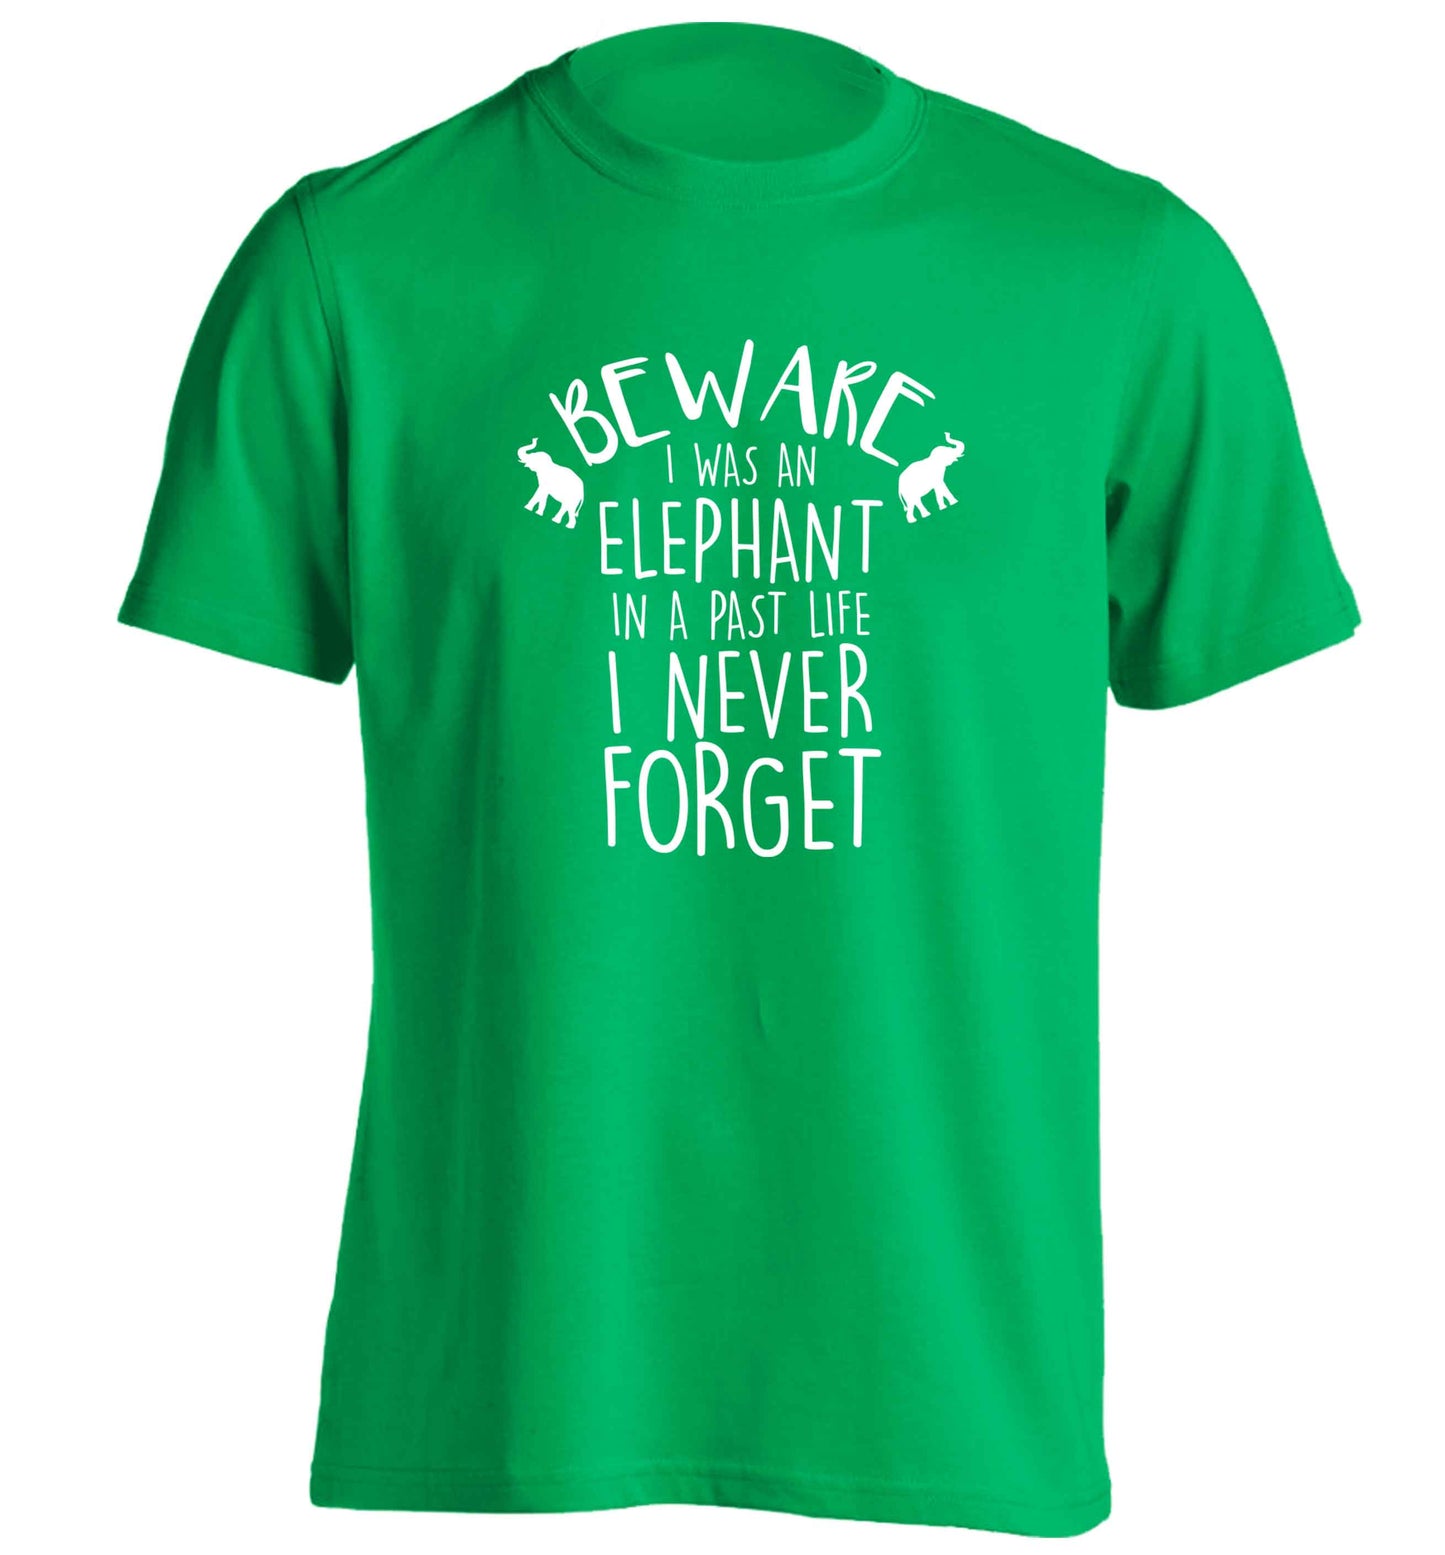 Beware I was an elephant in my past life I never forget adults unisex green Tshirt 2XL